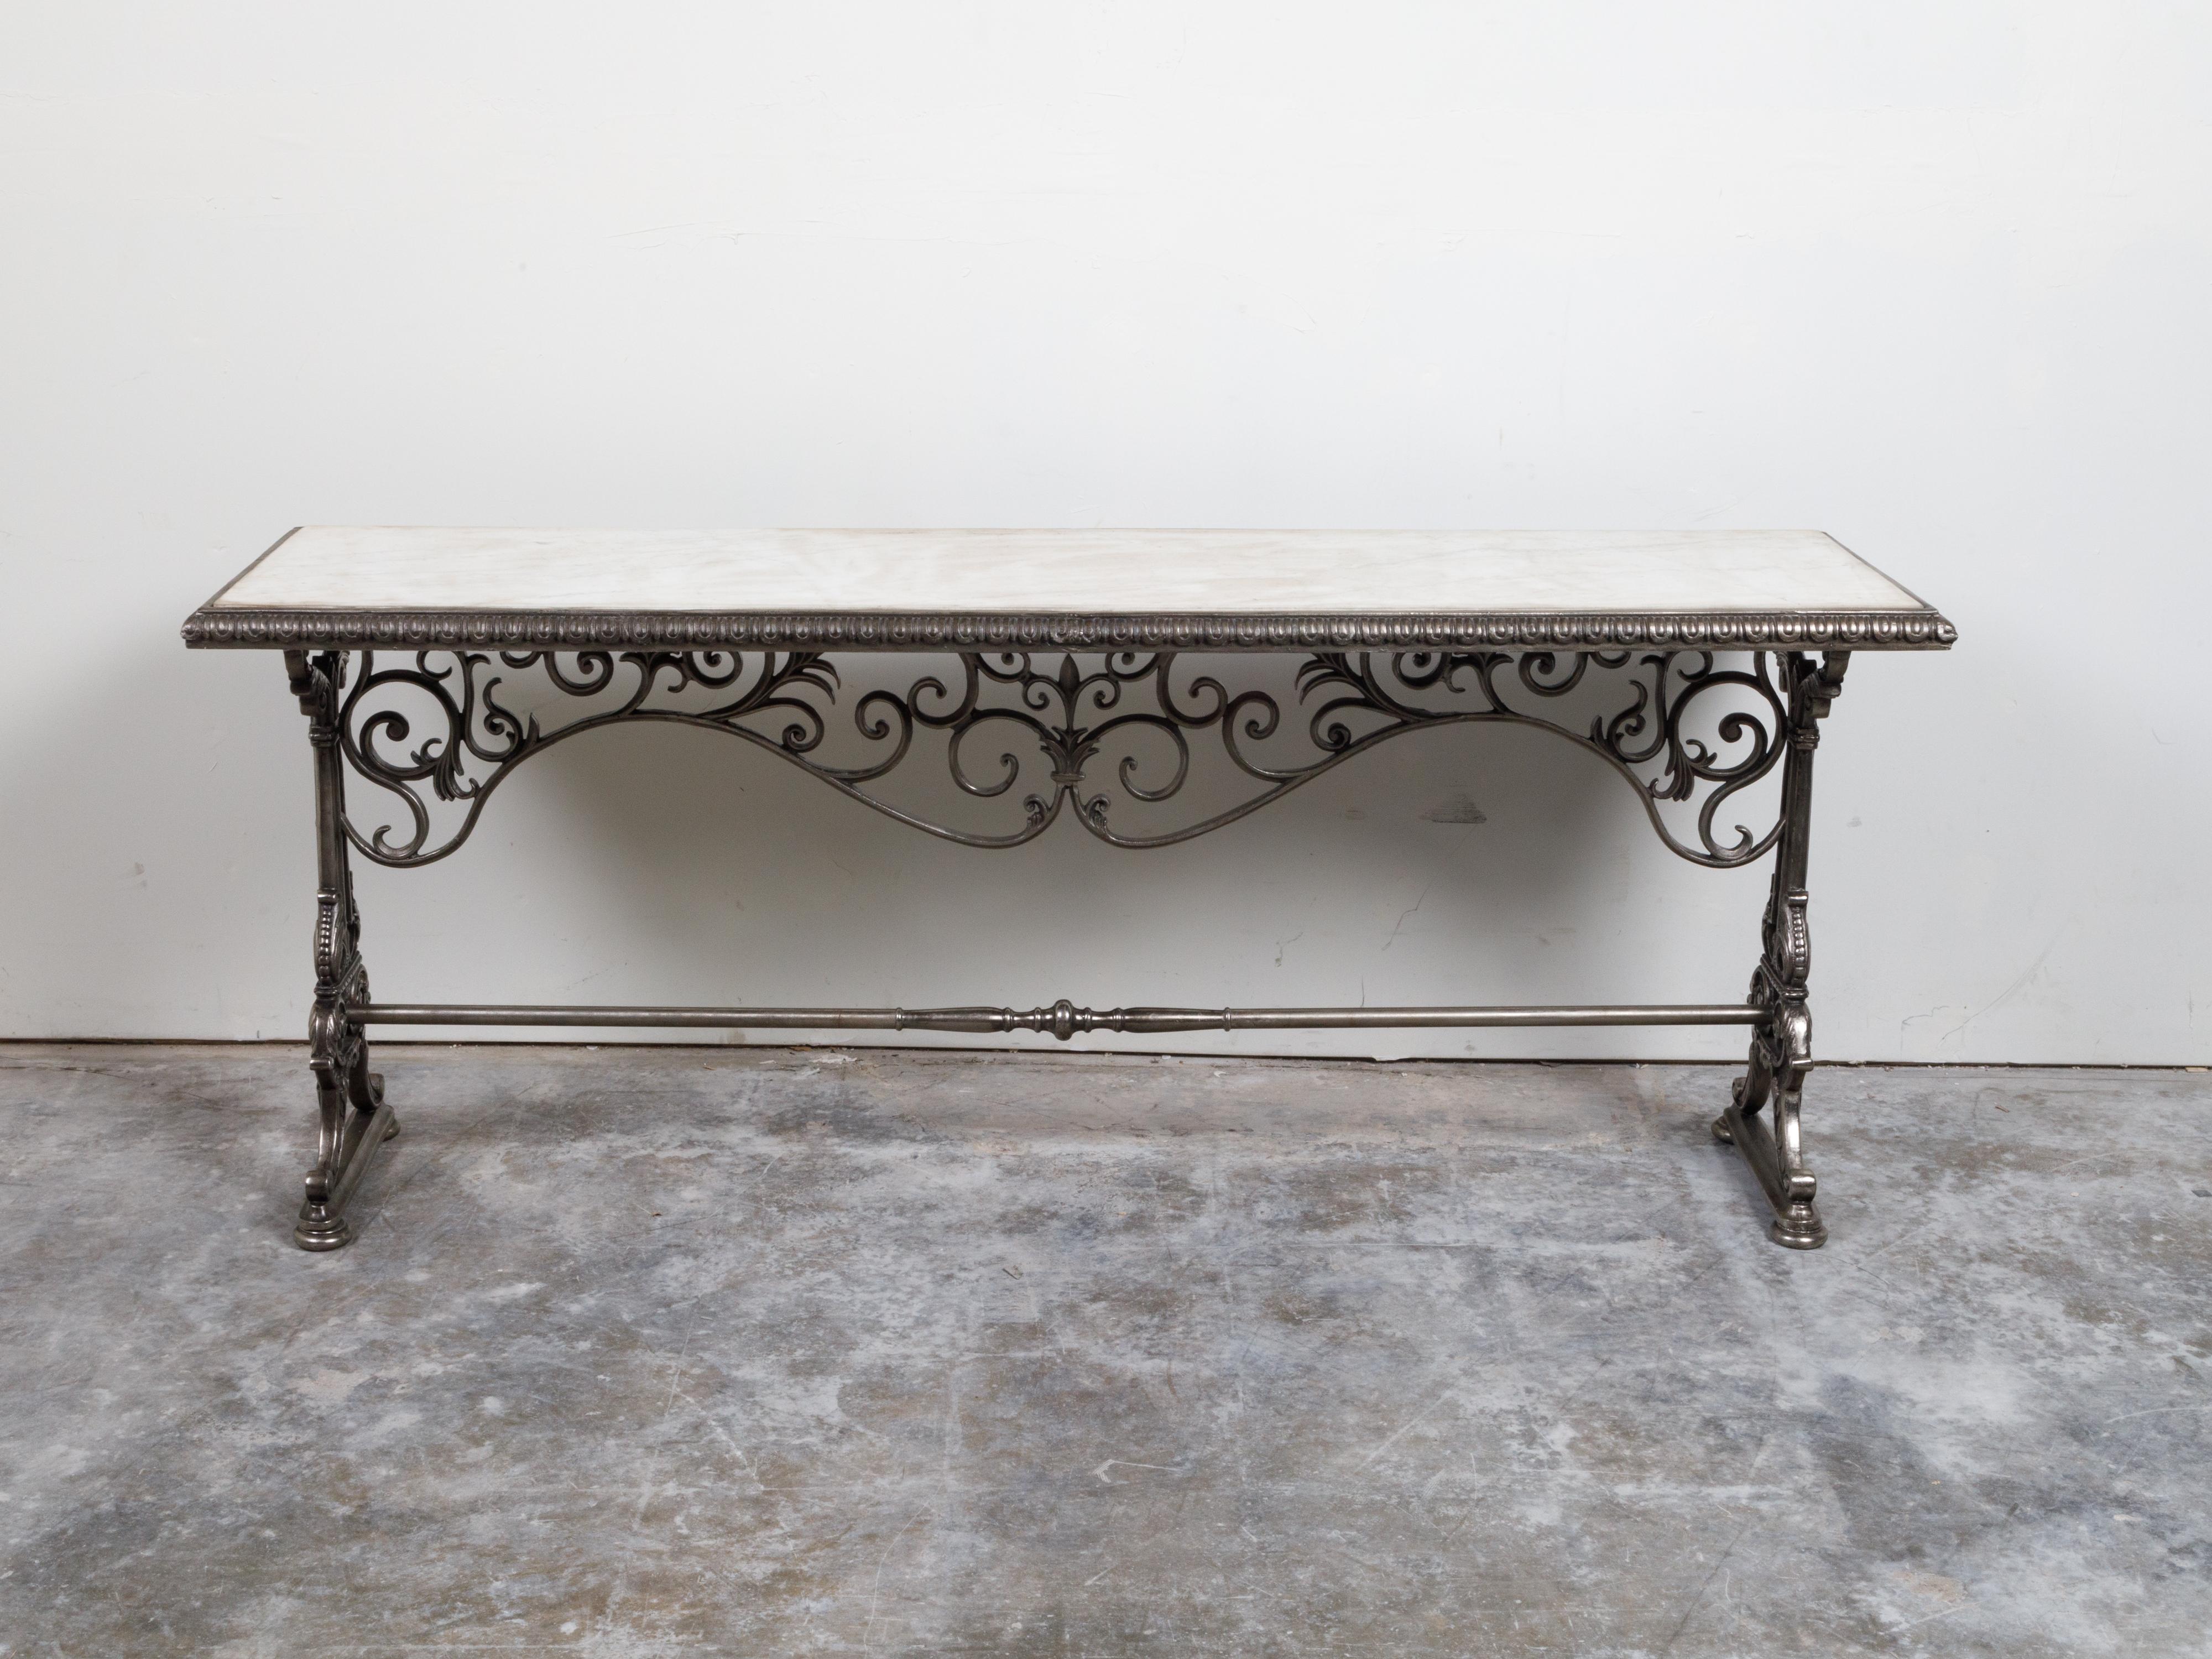 A French steel pastry table from the 19th century, with white marble top and scrolling accents. Created in France during the 19th century, this pastry table features a rectangular white marble top surrounded by an egg-and-dart edge. Raised on an